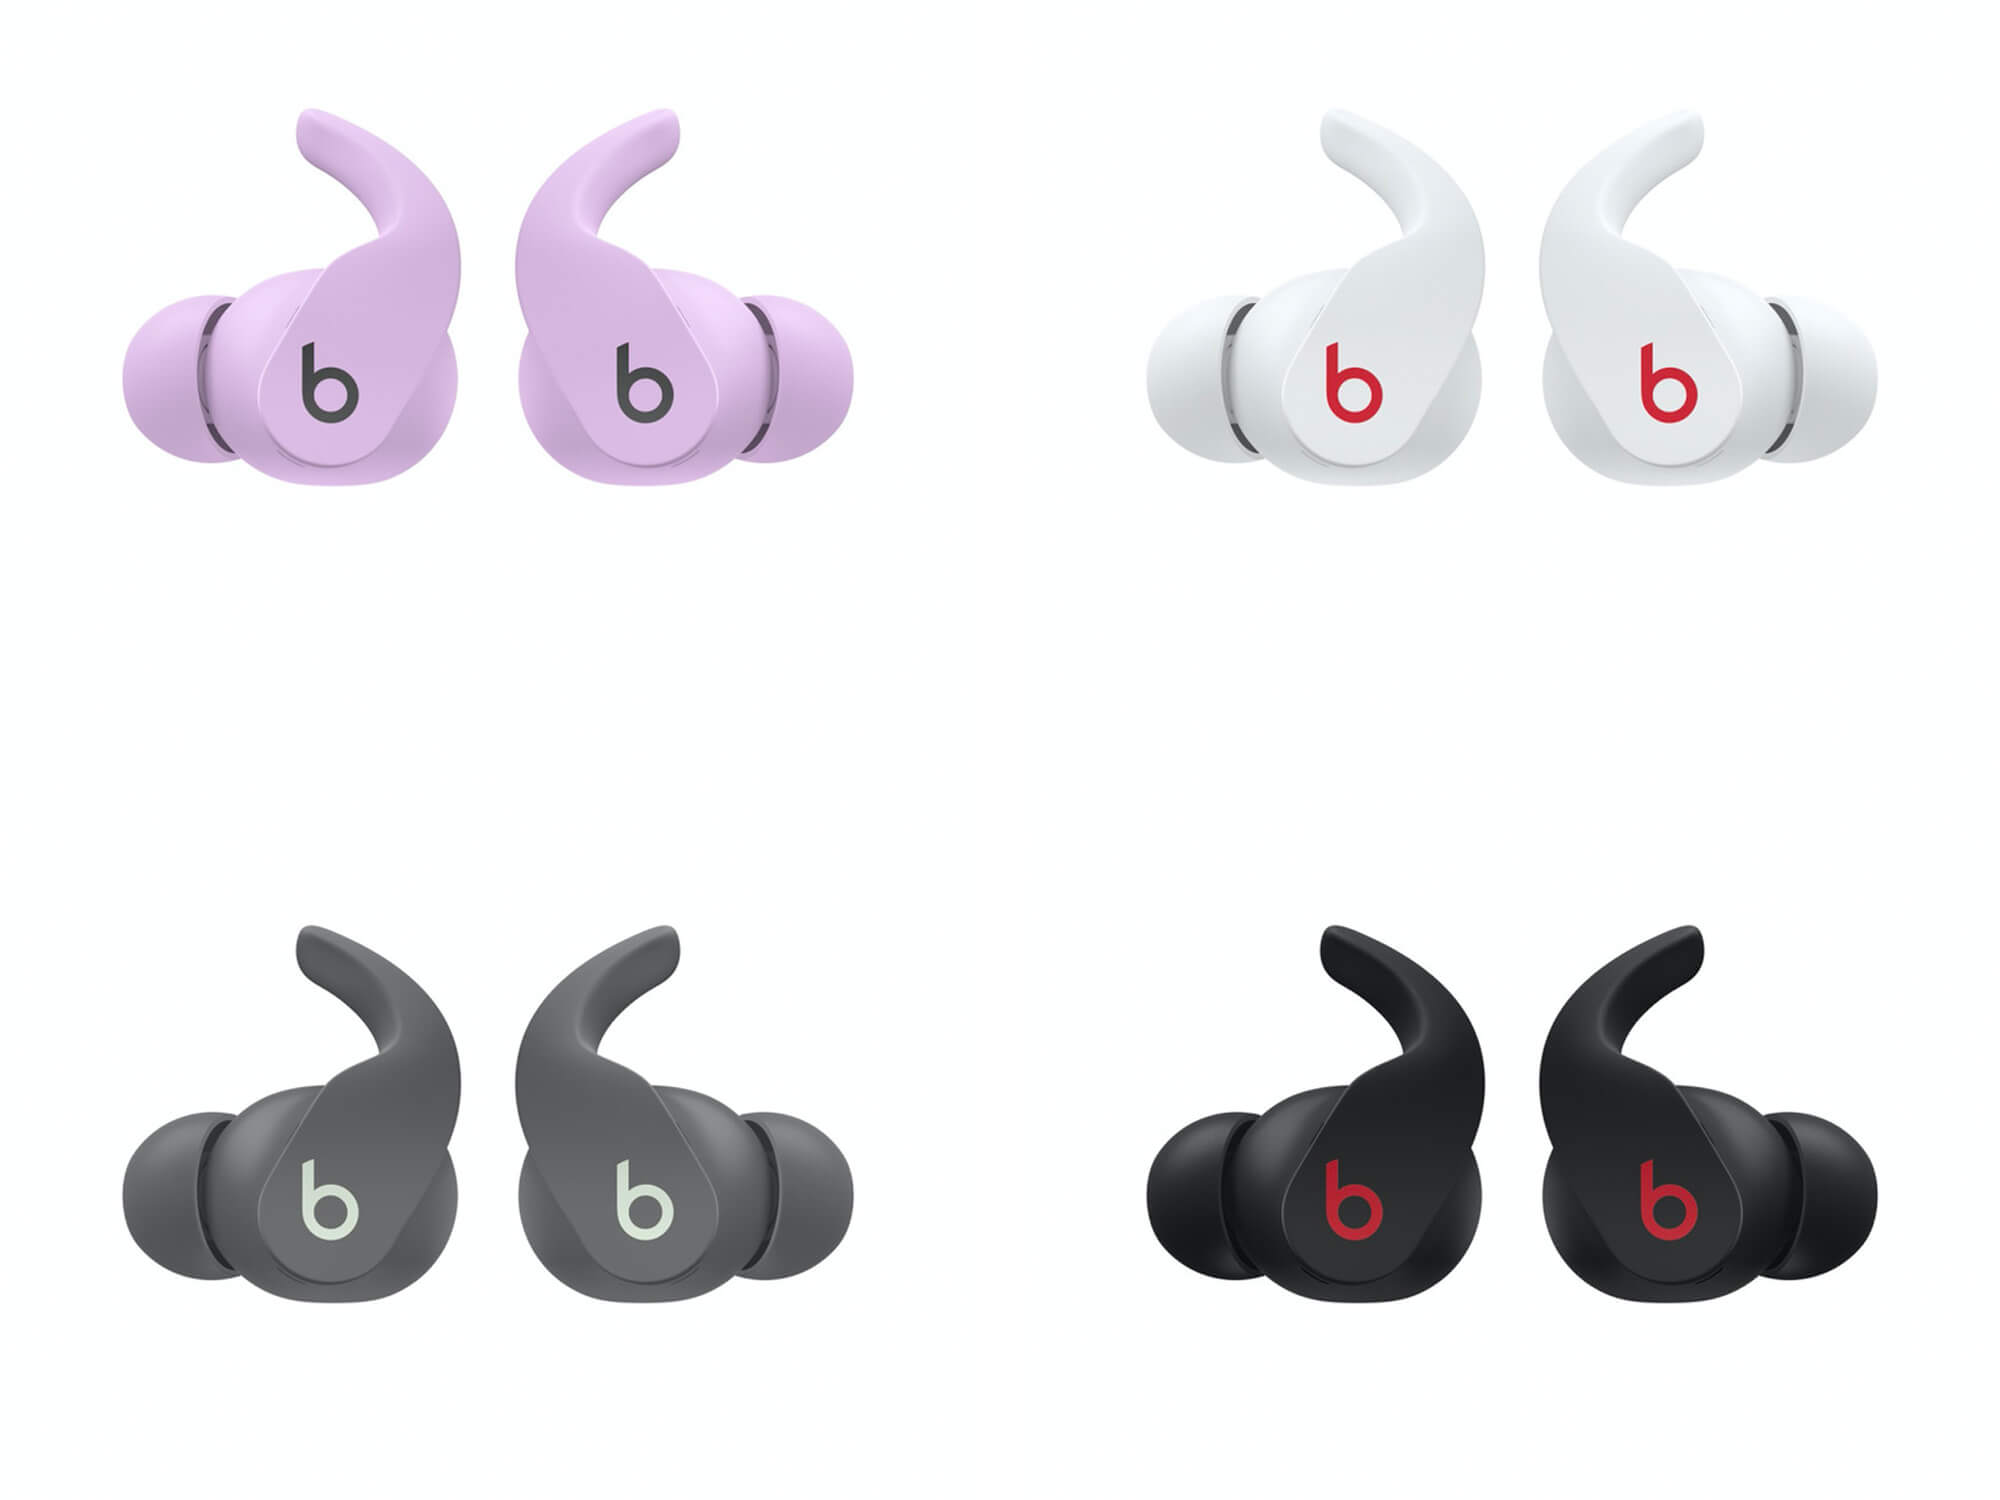 Beats Fit Pro earbuds with wingtips rumoured to be landing very soon